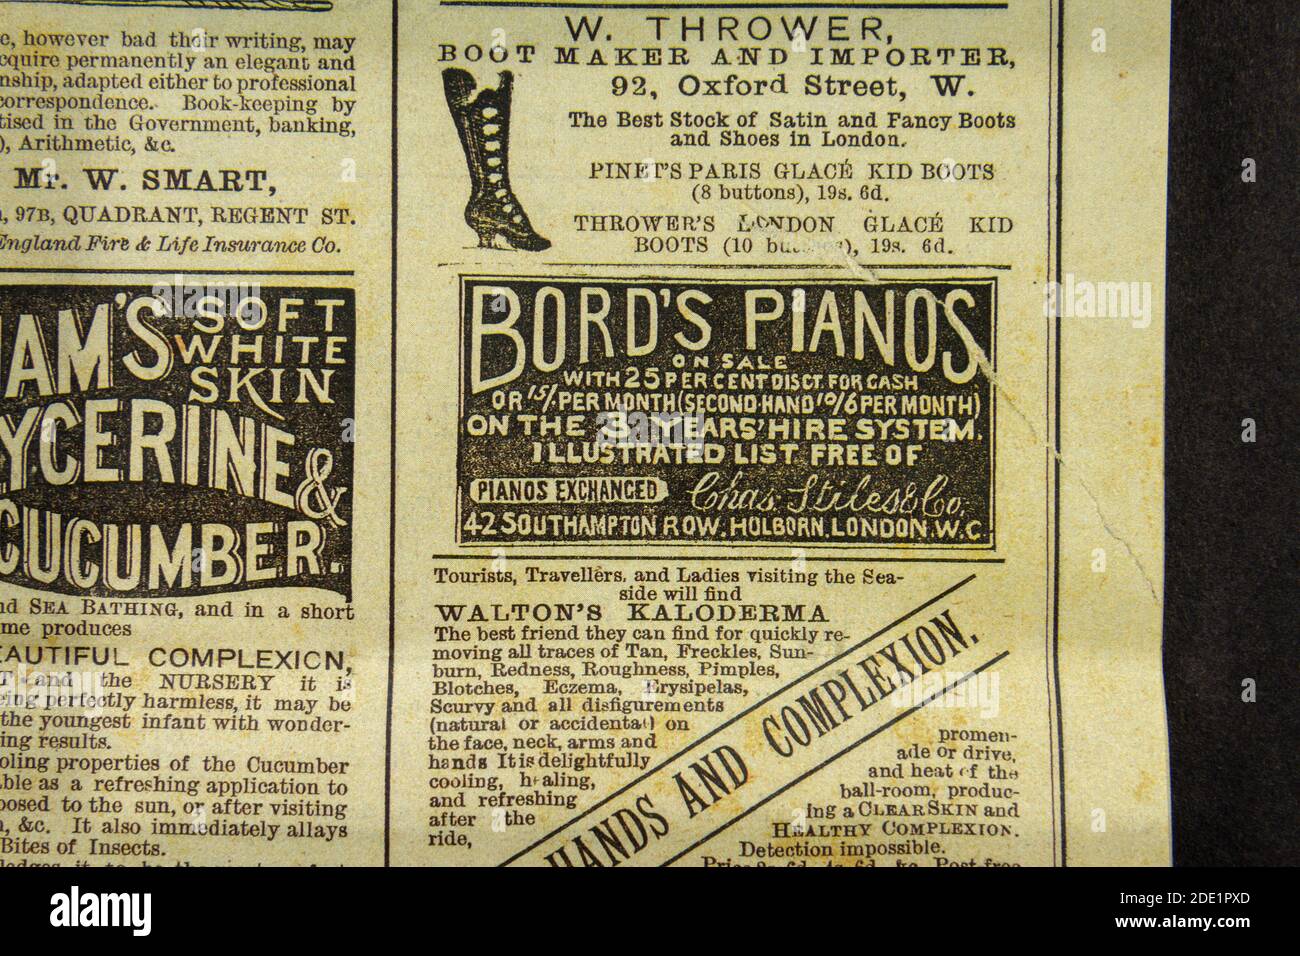 Advert for Bord's Pianos in Southampton Row, London, in the Gaiety Theatre programme (replica), 22nd October 1883. Stock Photo